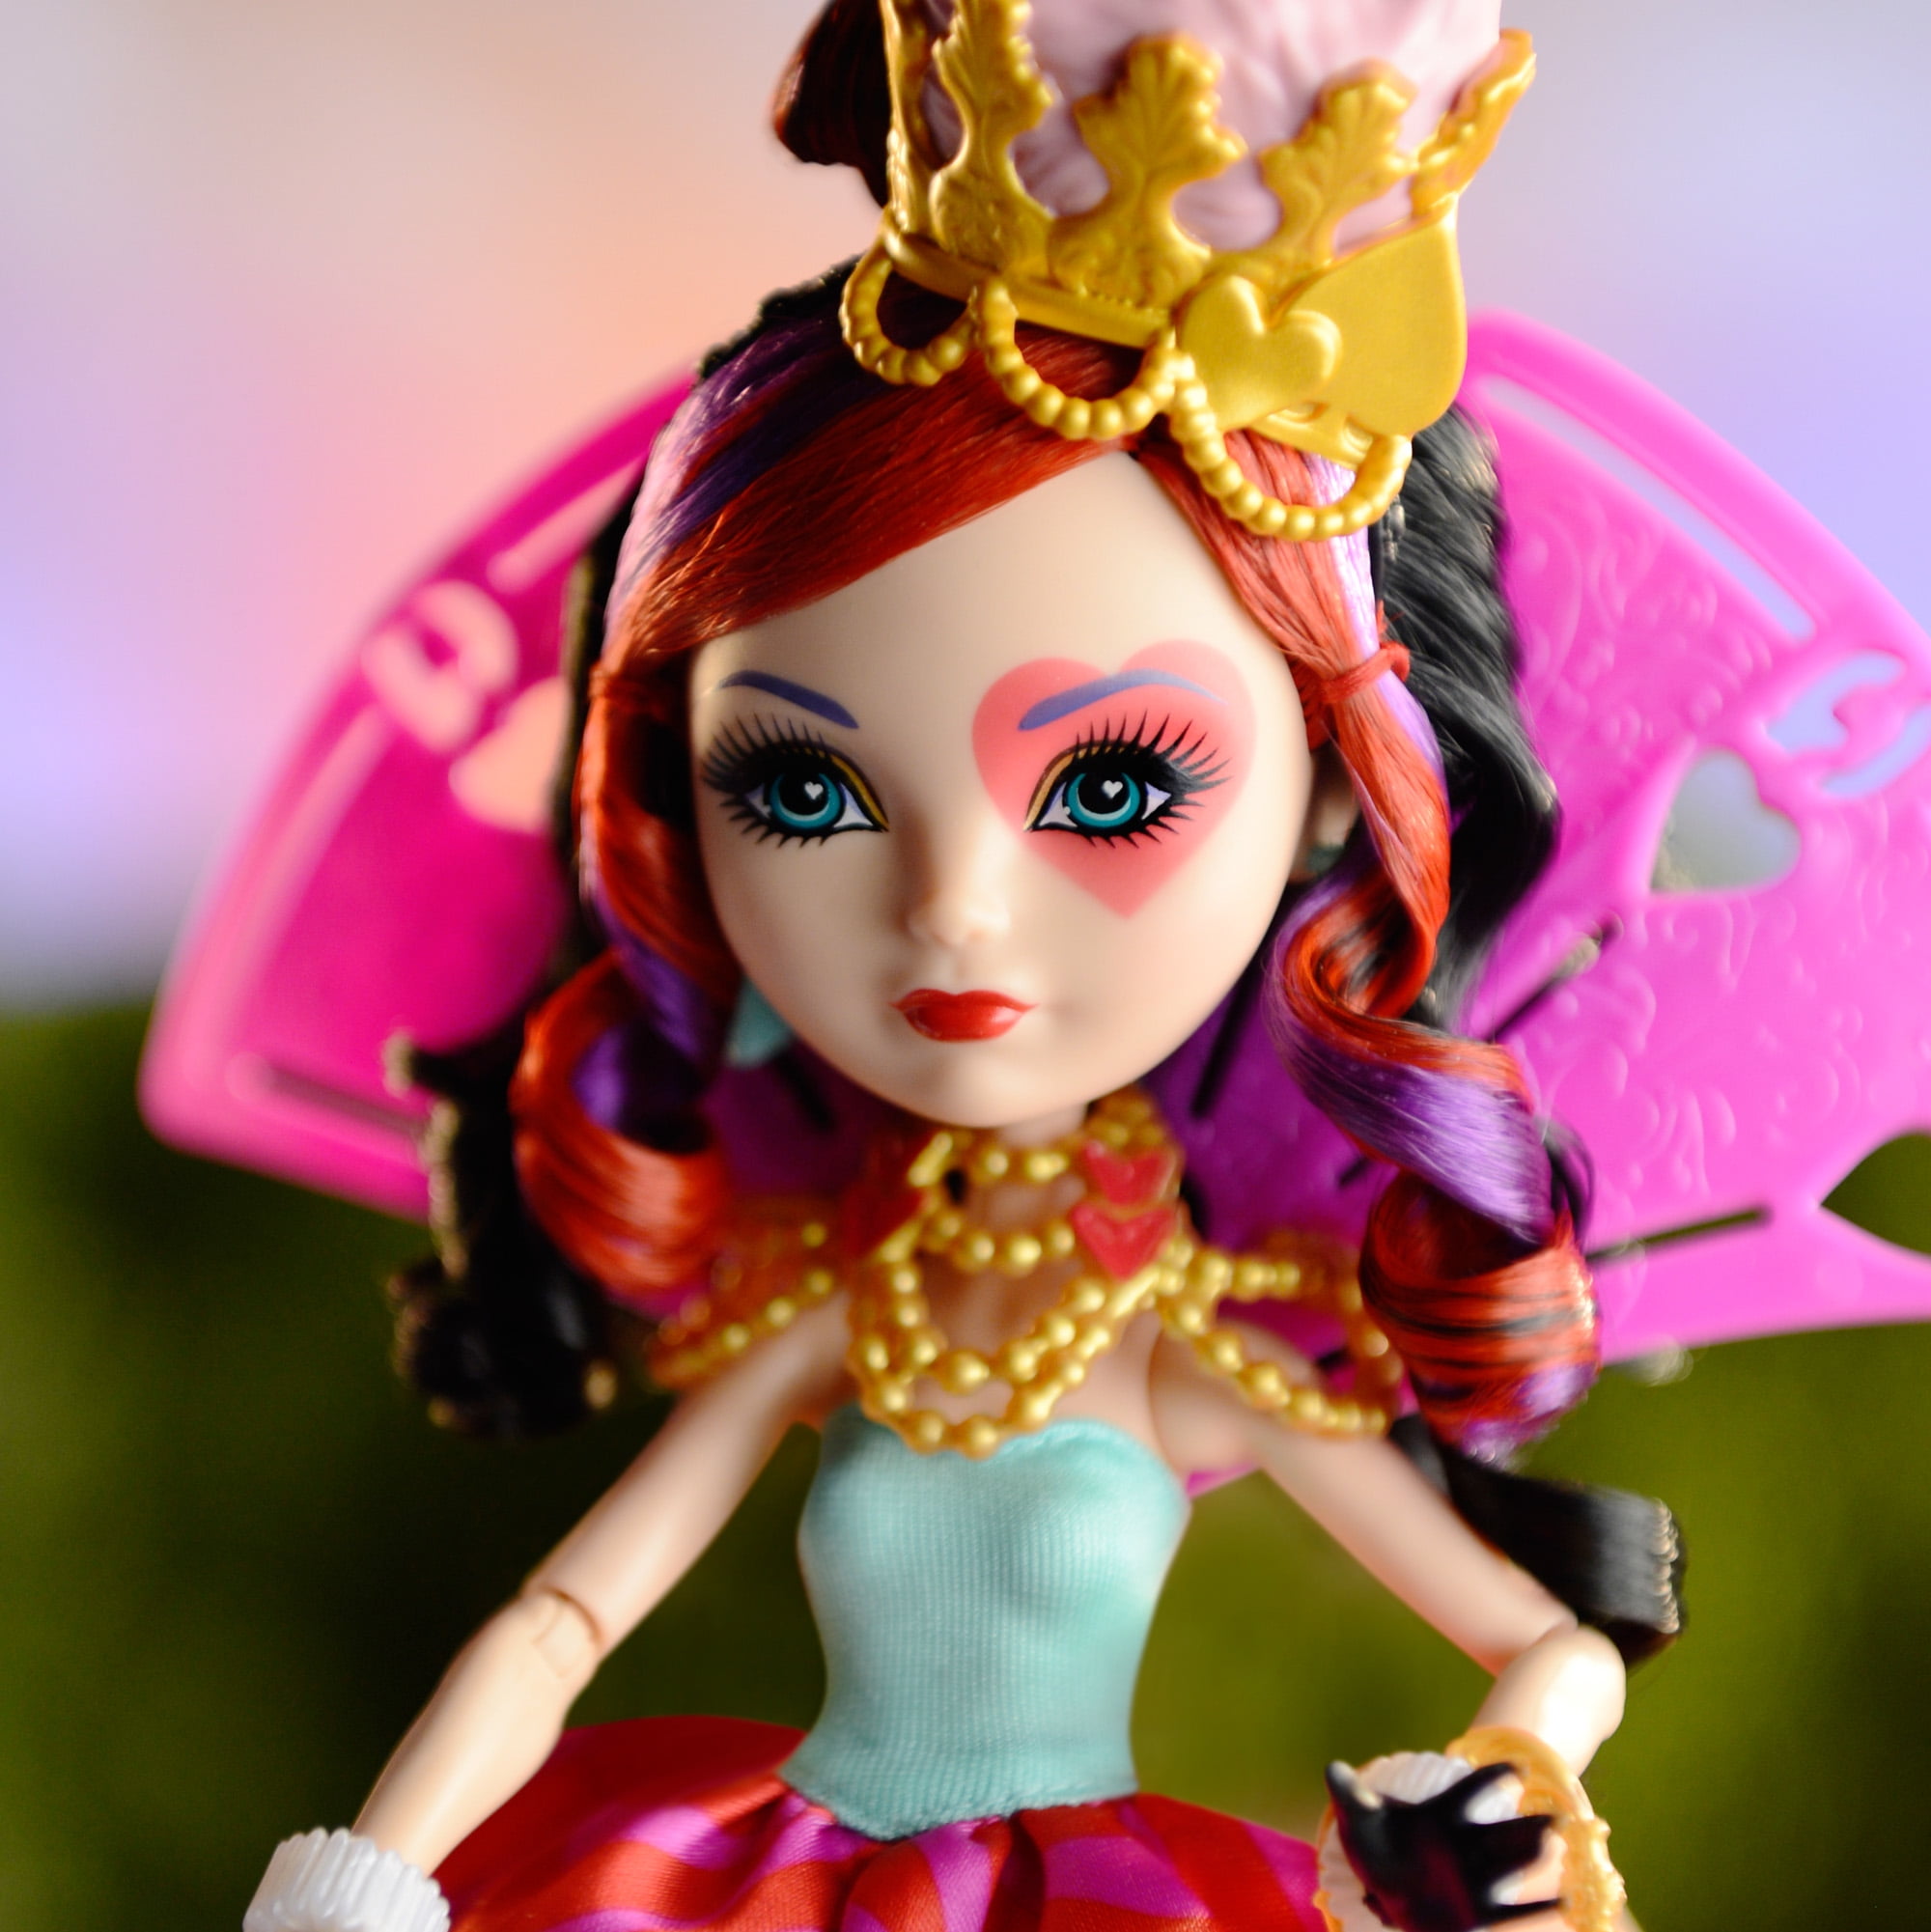 Review LIZZIE HEARTS  Ever After High 